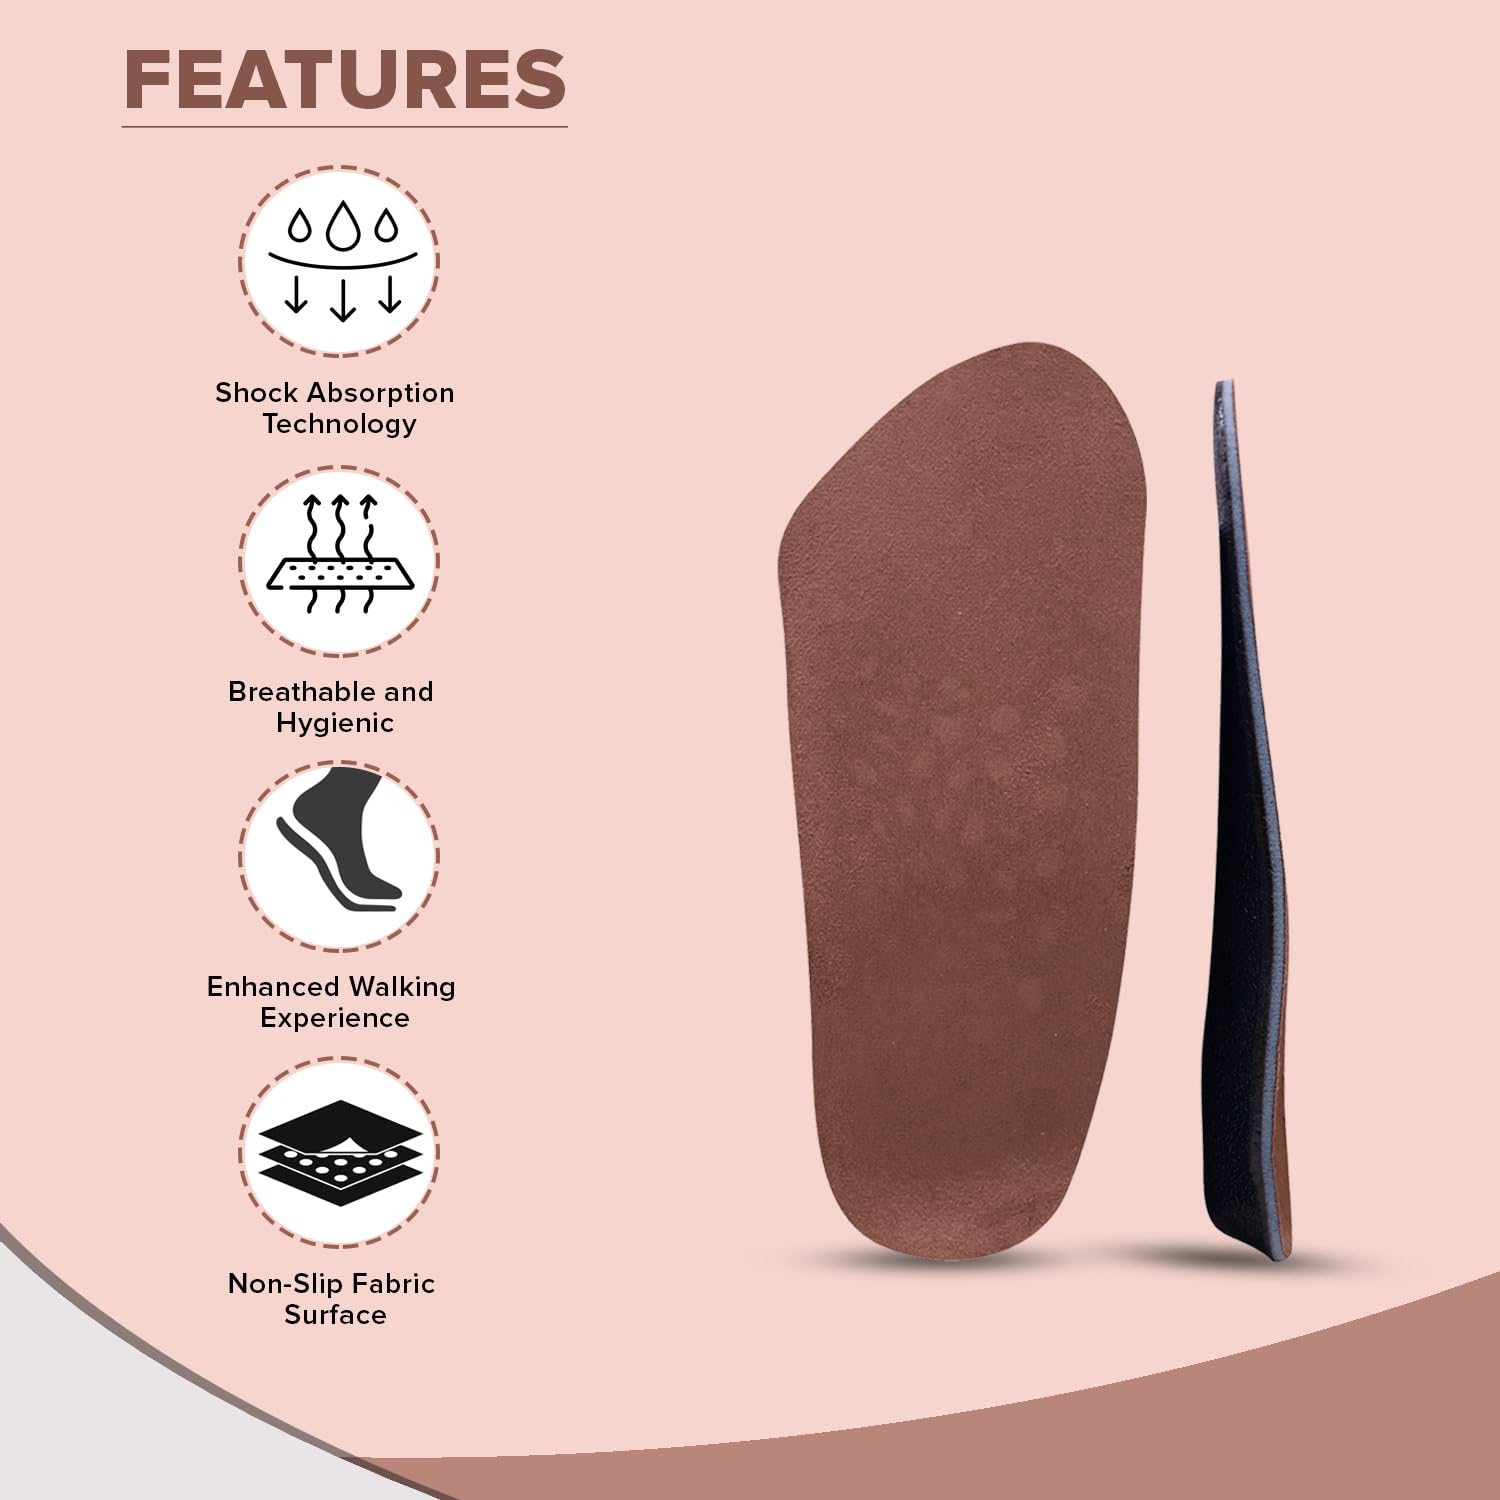 Dr Foot TRI Comfort Insoles | For Heel, Arch Support & Ball Of Foot With Targeted Cushioning | Shock Absorption, Comfort, Breathability| For Men & Women - 1 Pair